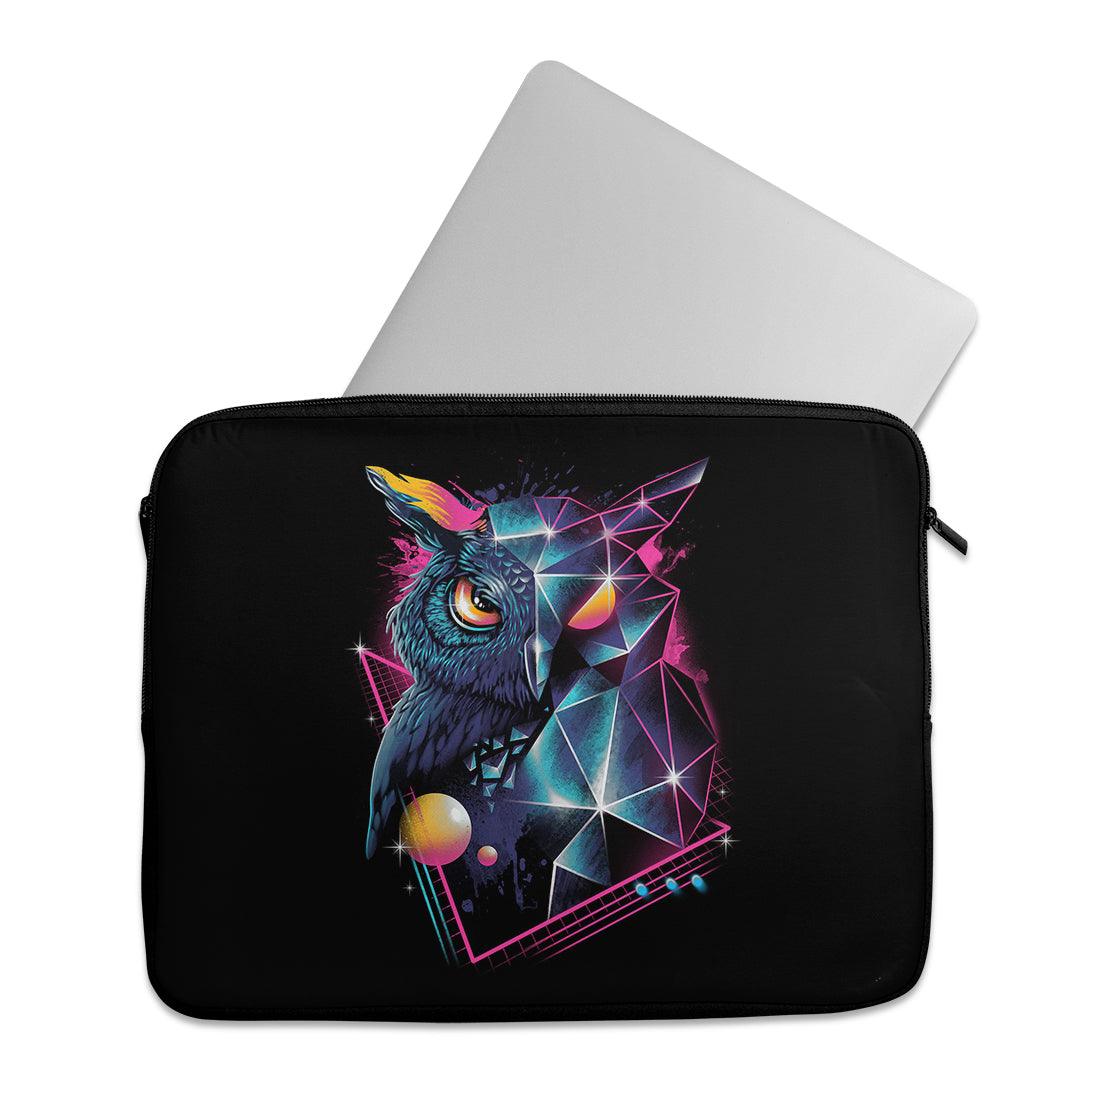 Laptop Sleeve Abstract owl